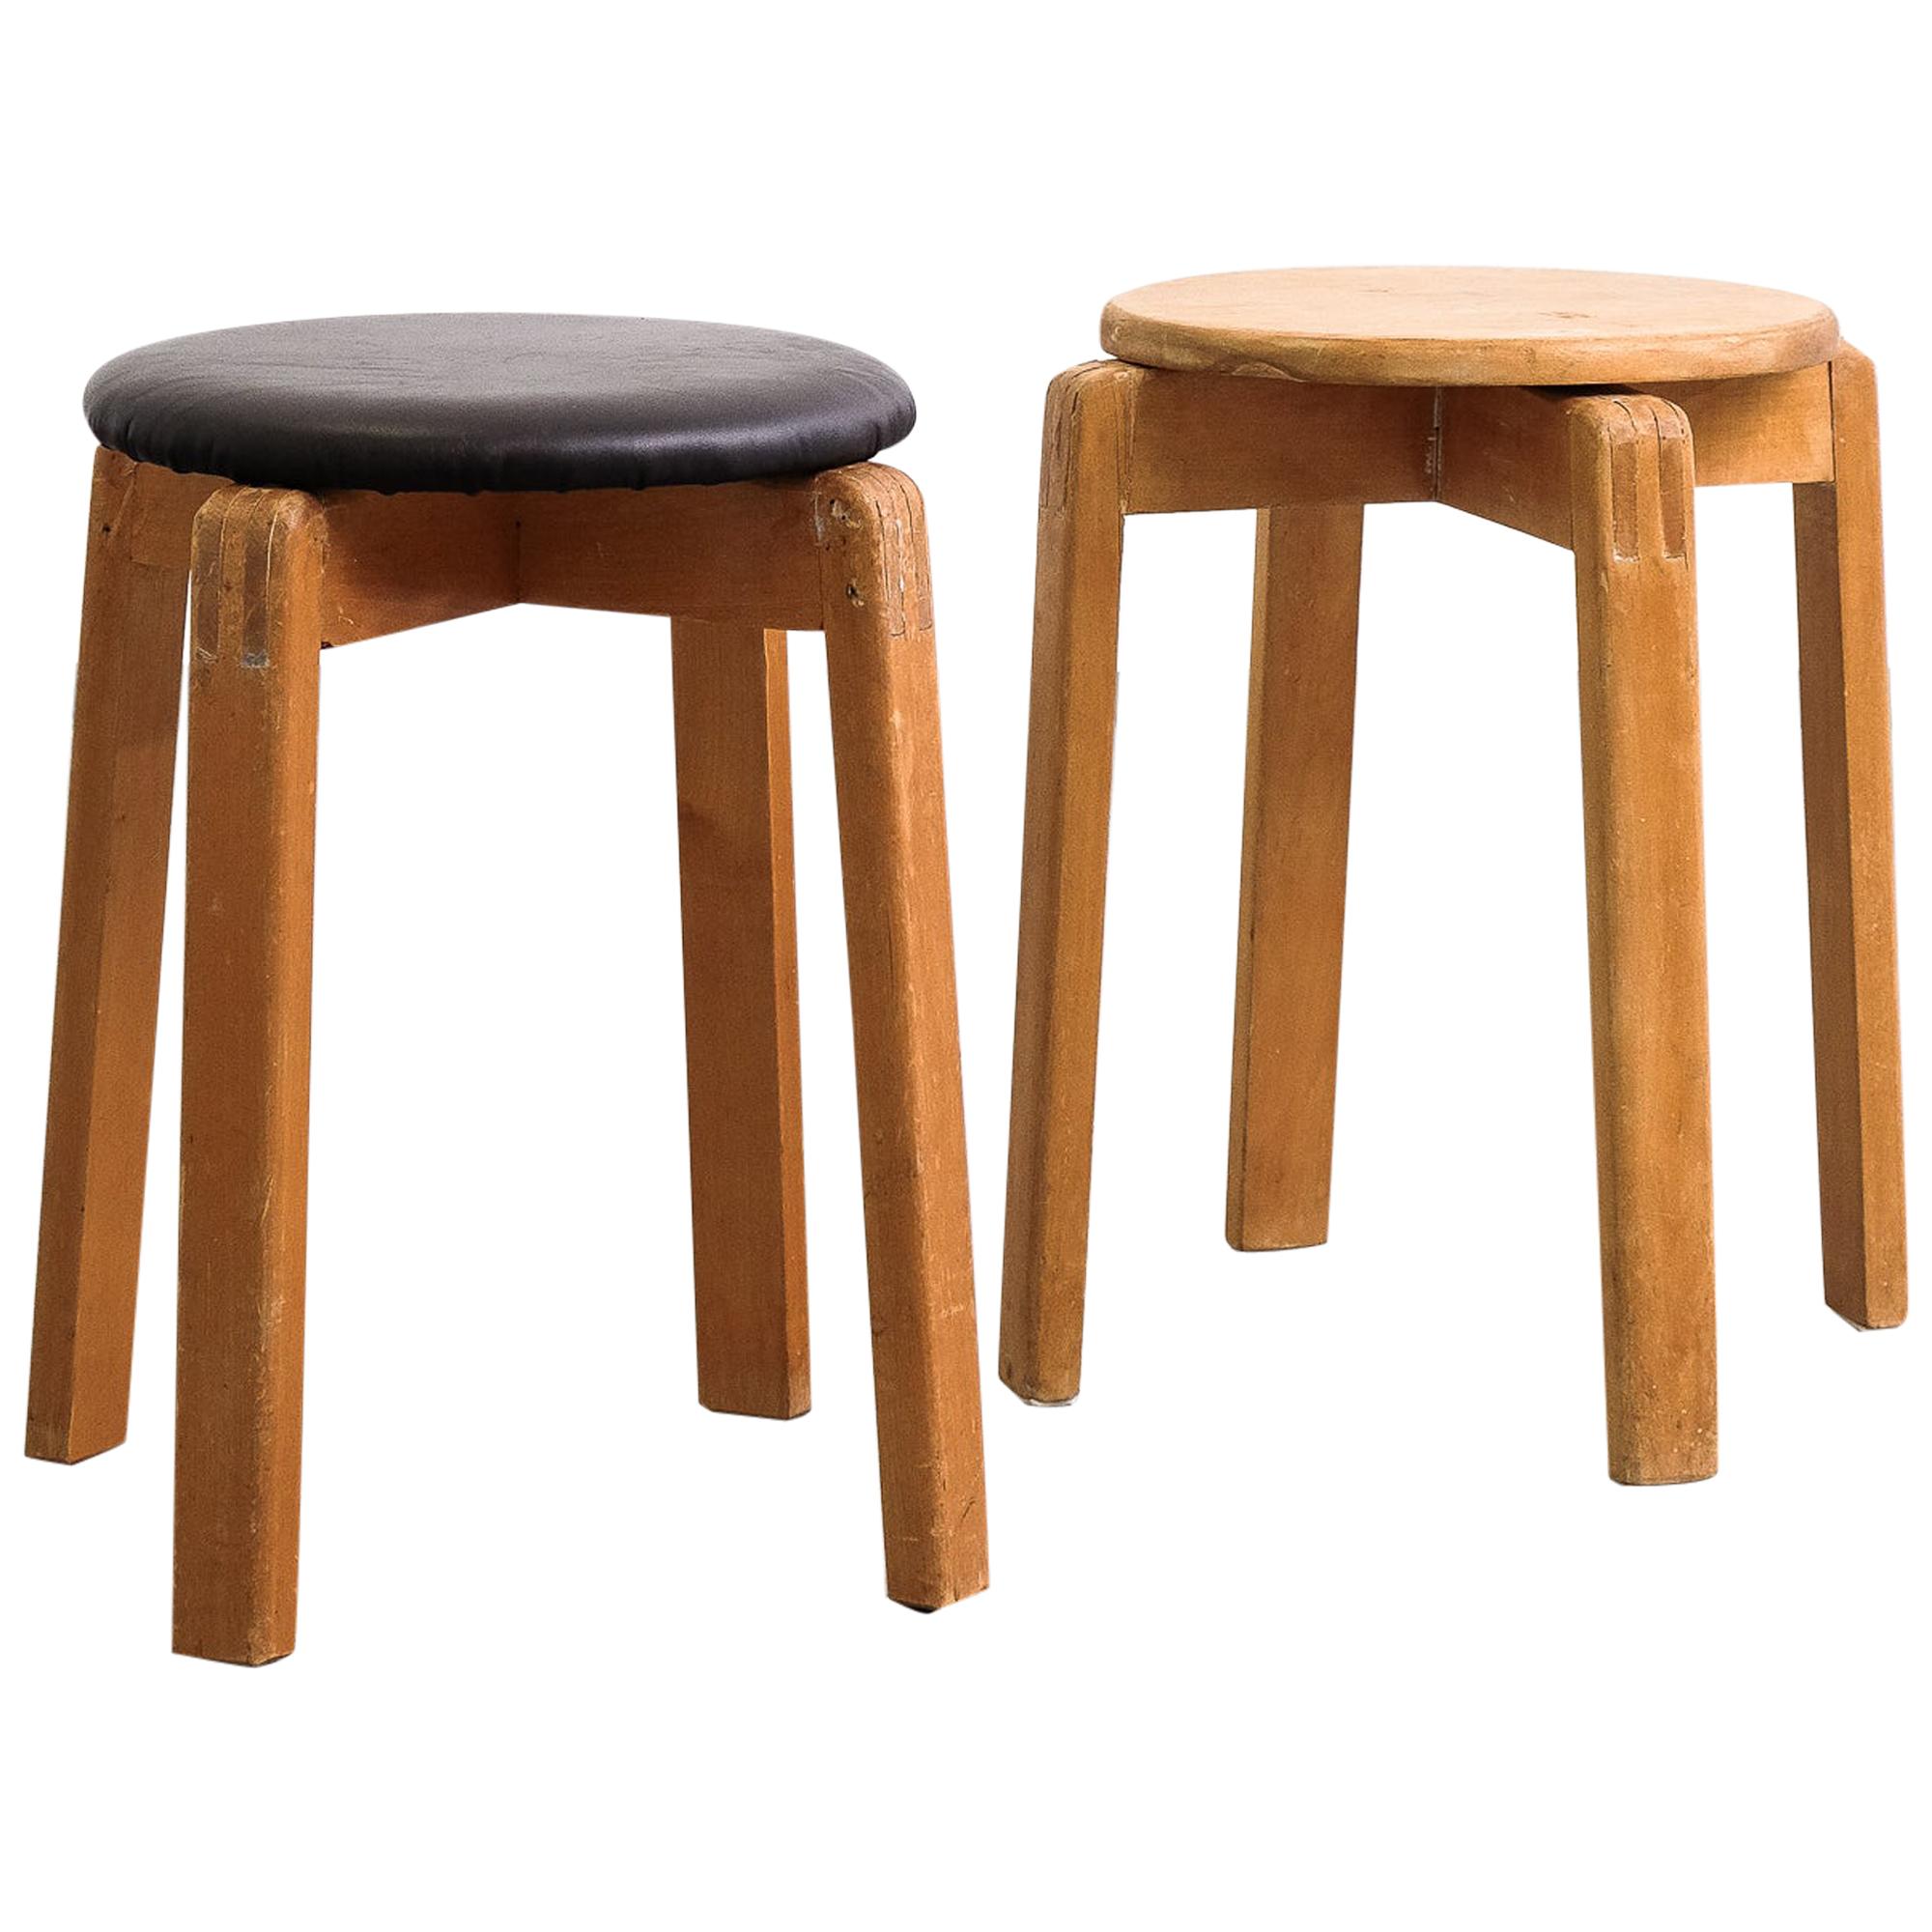 Pair of Midcentury Finnish Patinated Wooden Stools